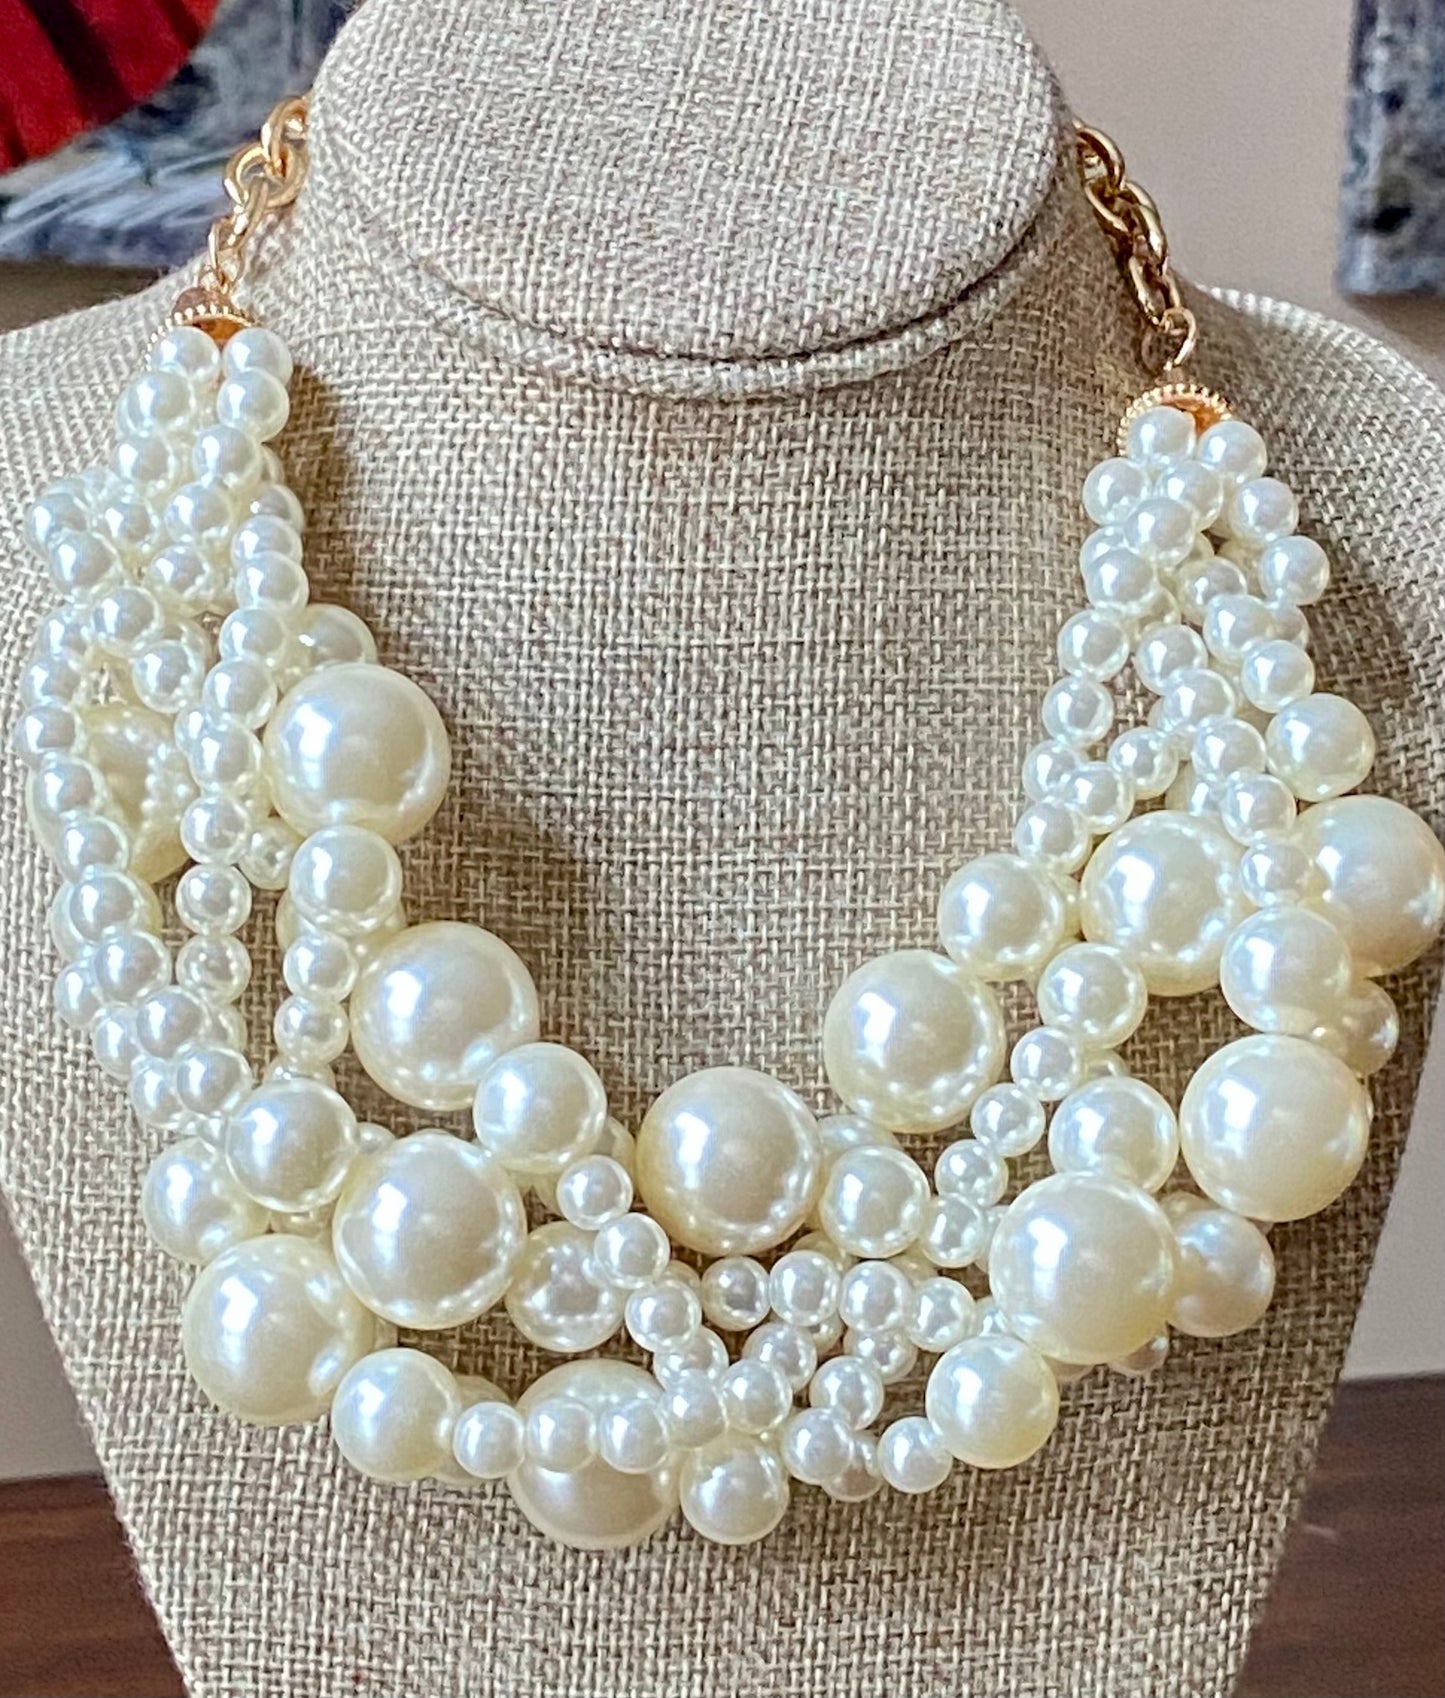 Ladies' Multi-Strand Faux Pearl Collar Necklace